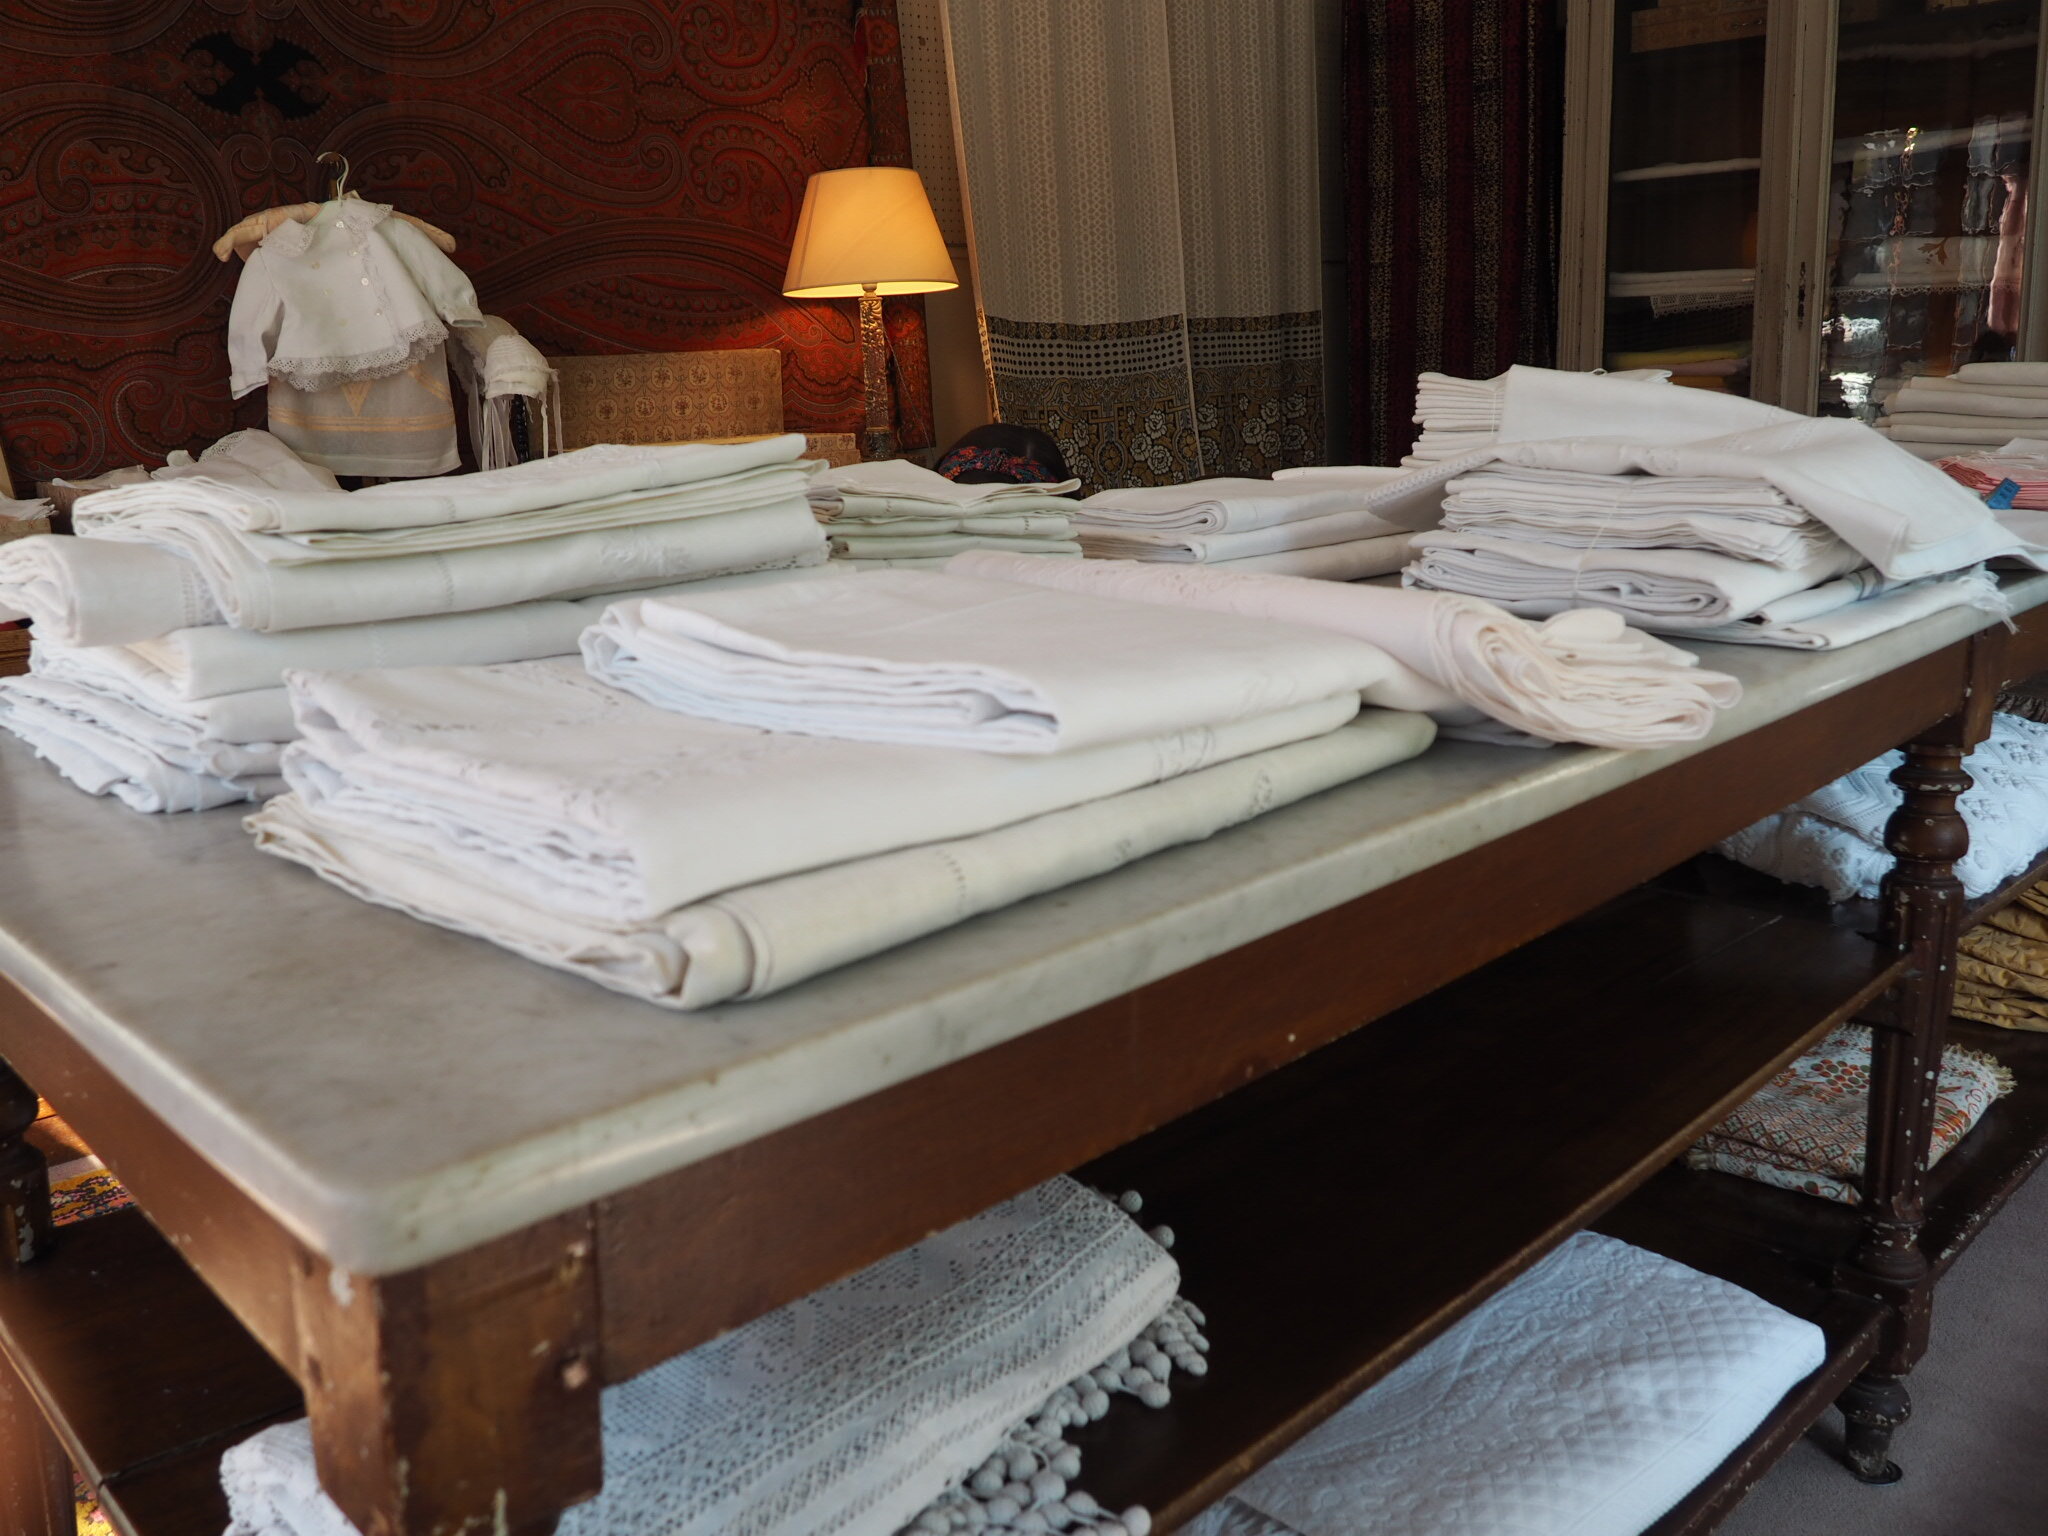 A beautiful curation of antique French linens